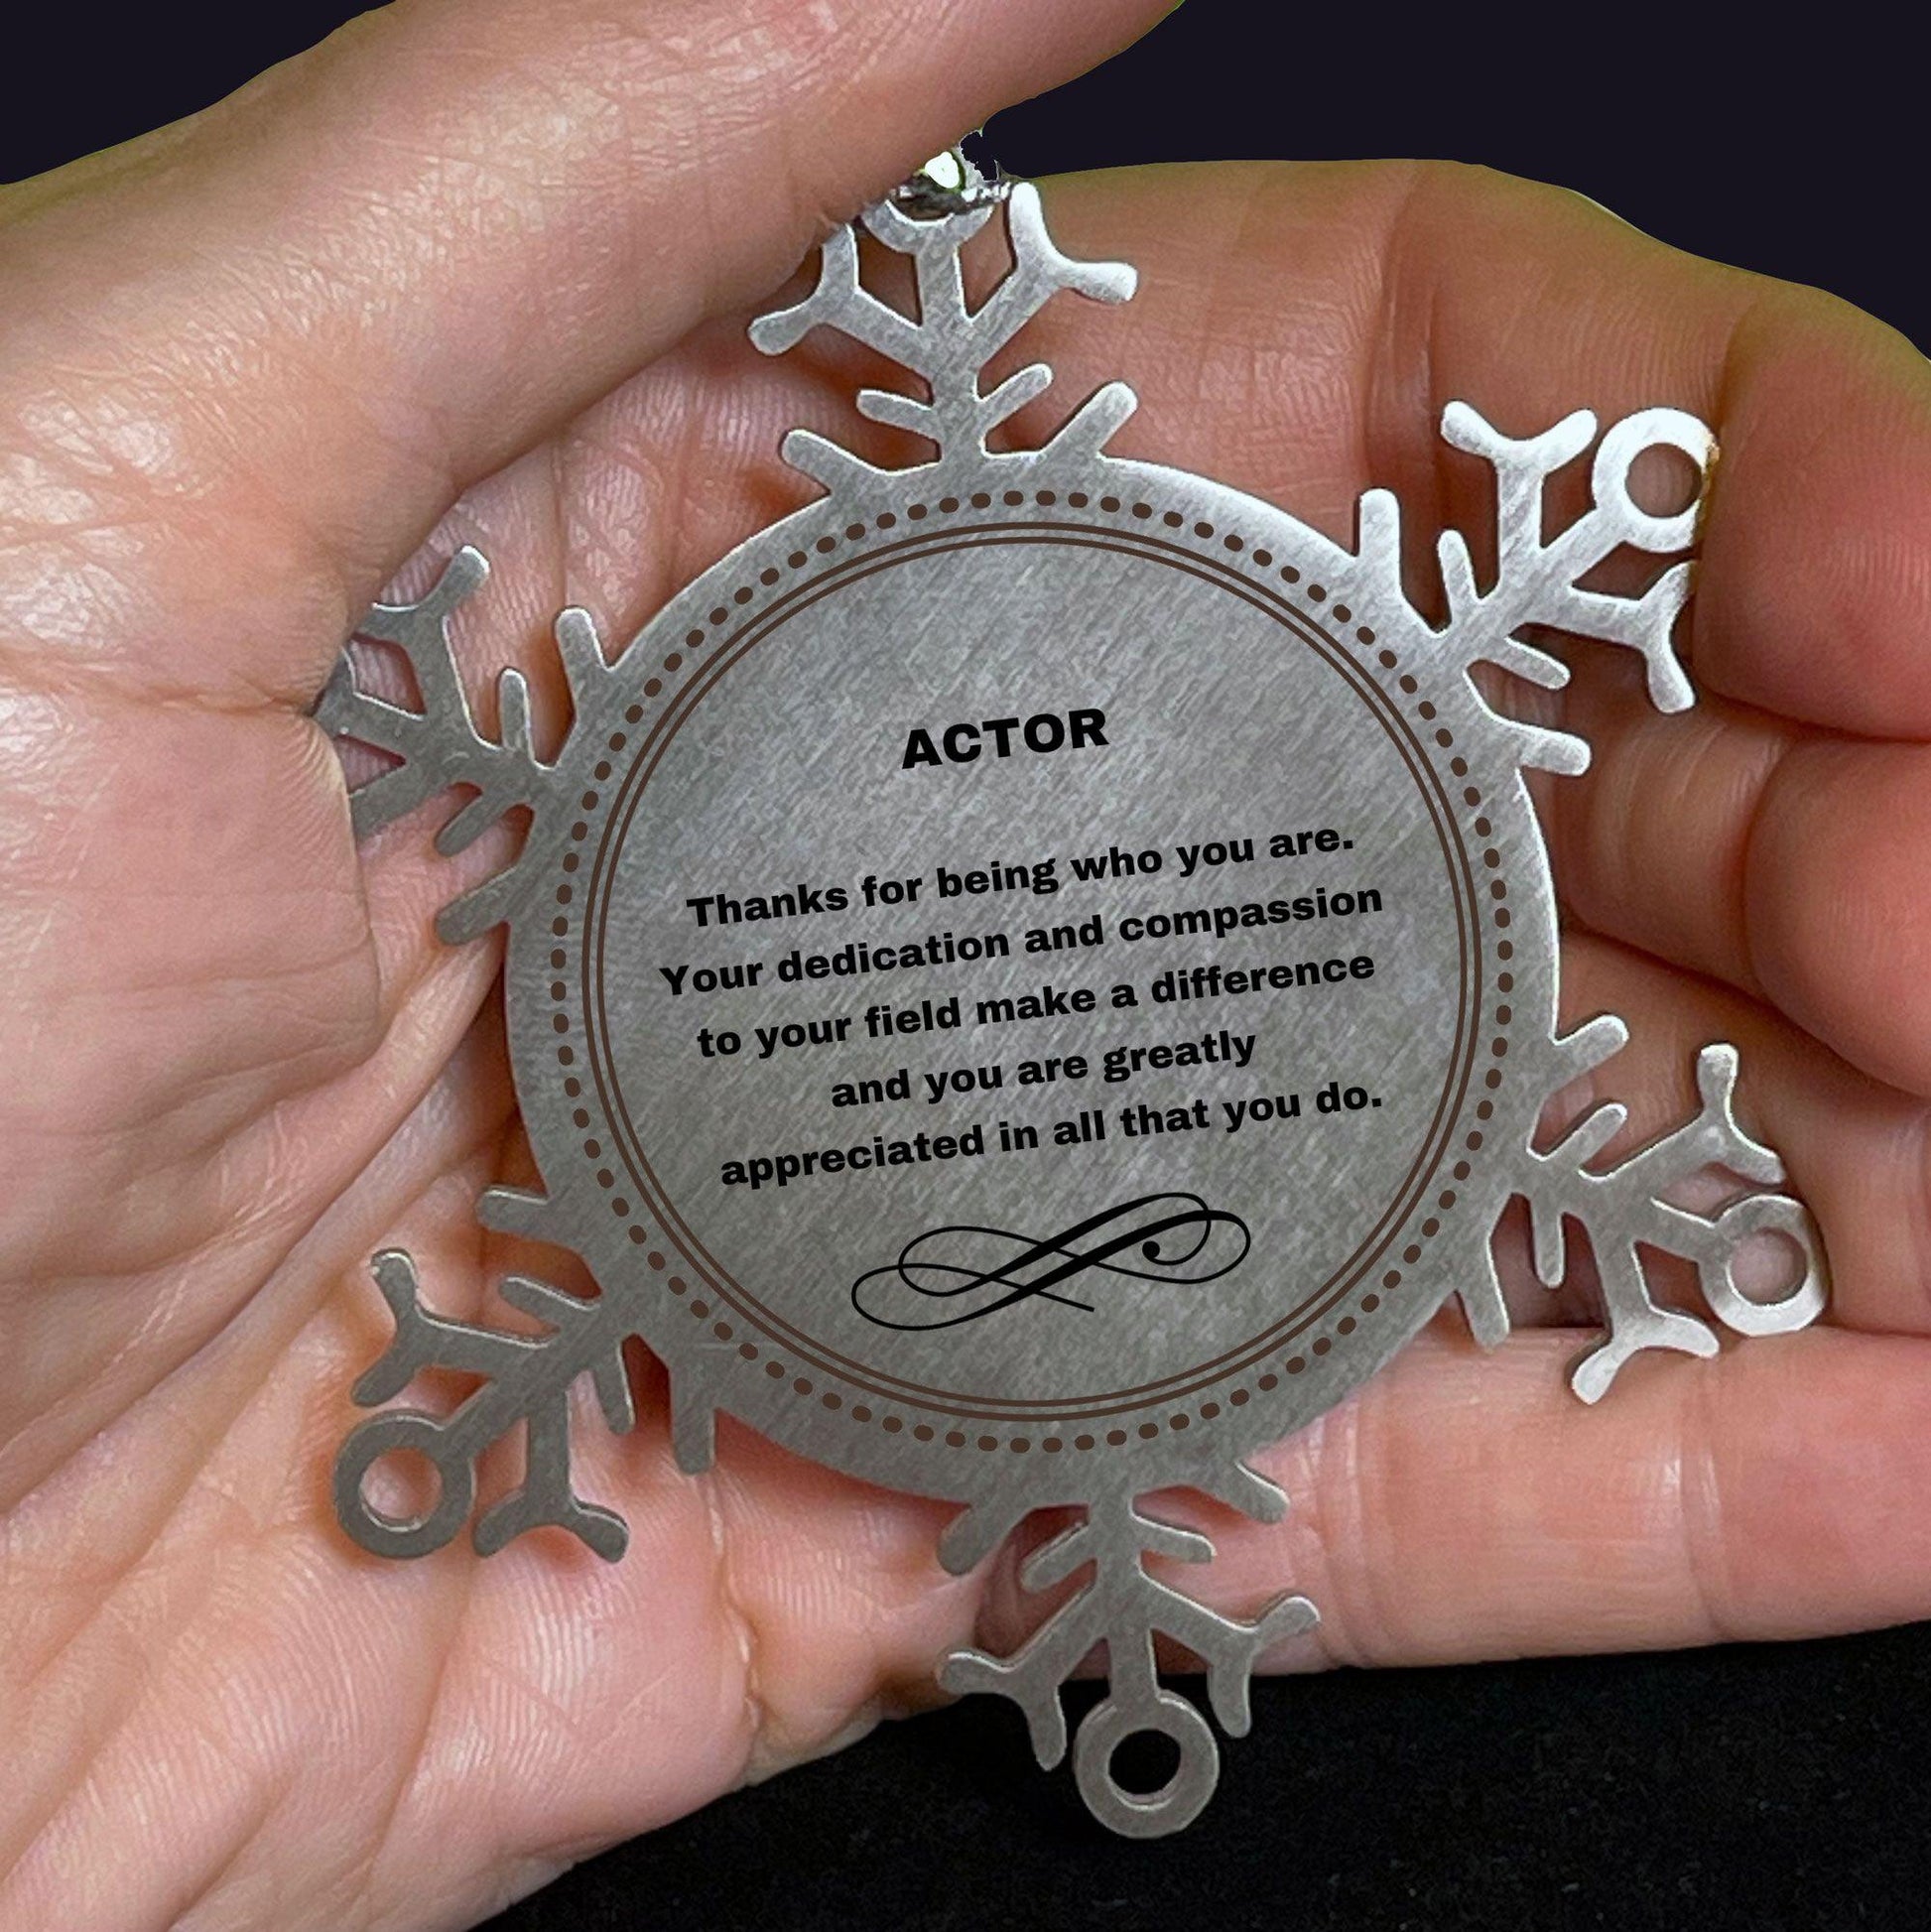 Actor Snowflake Ornament - Thanks for being who you are - Birthday Christmas Tree Gifts Coworkers Colleague Boss - Mallard Moon Gift Shop